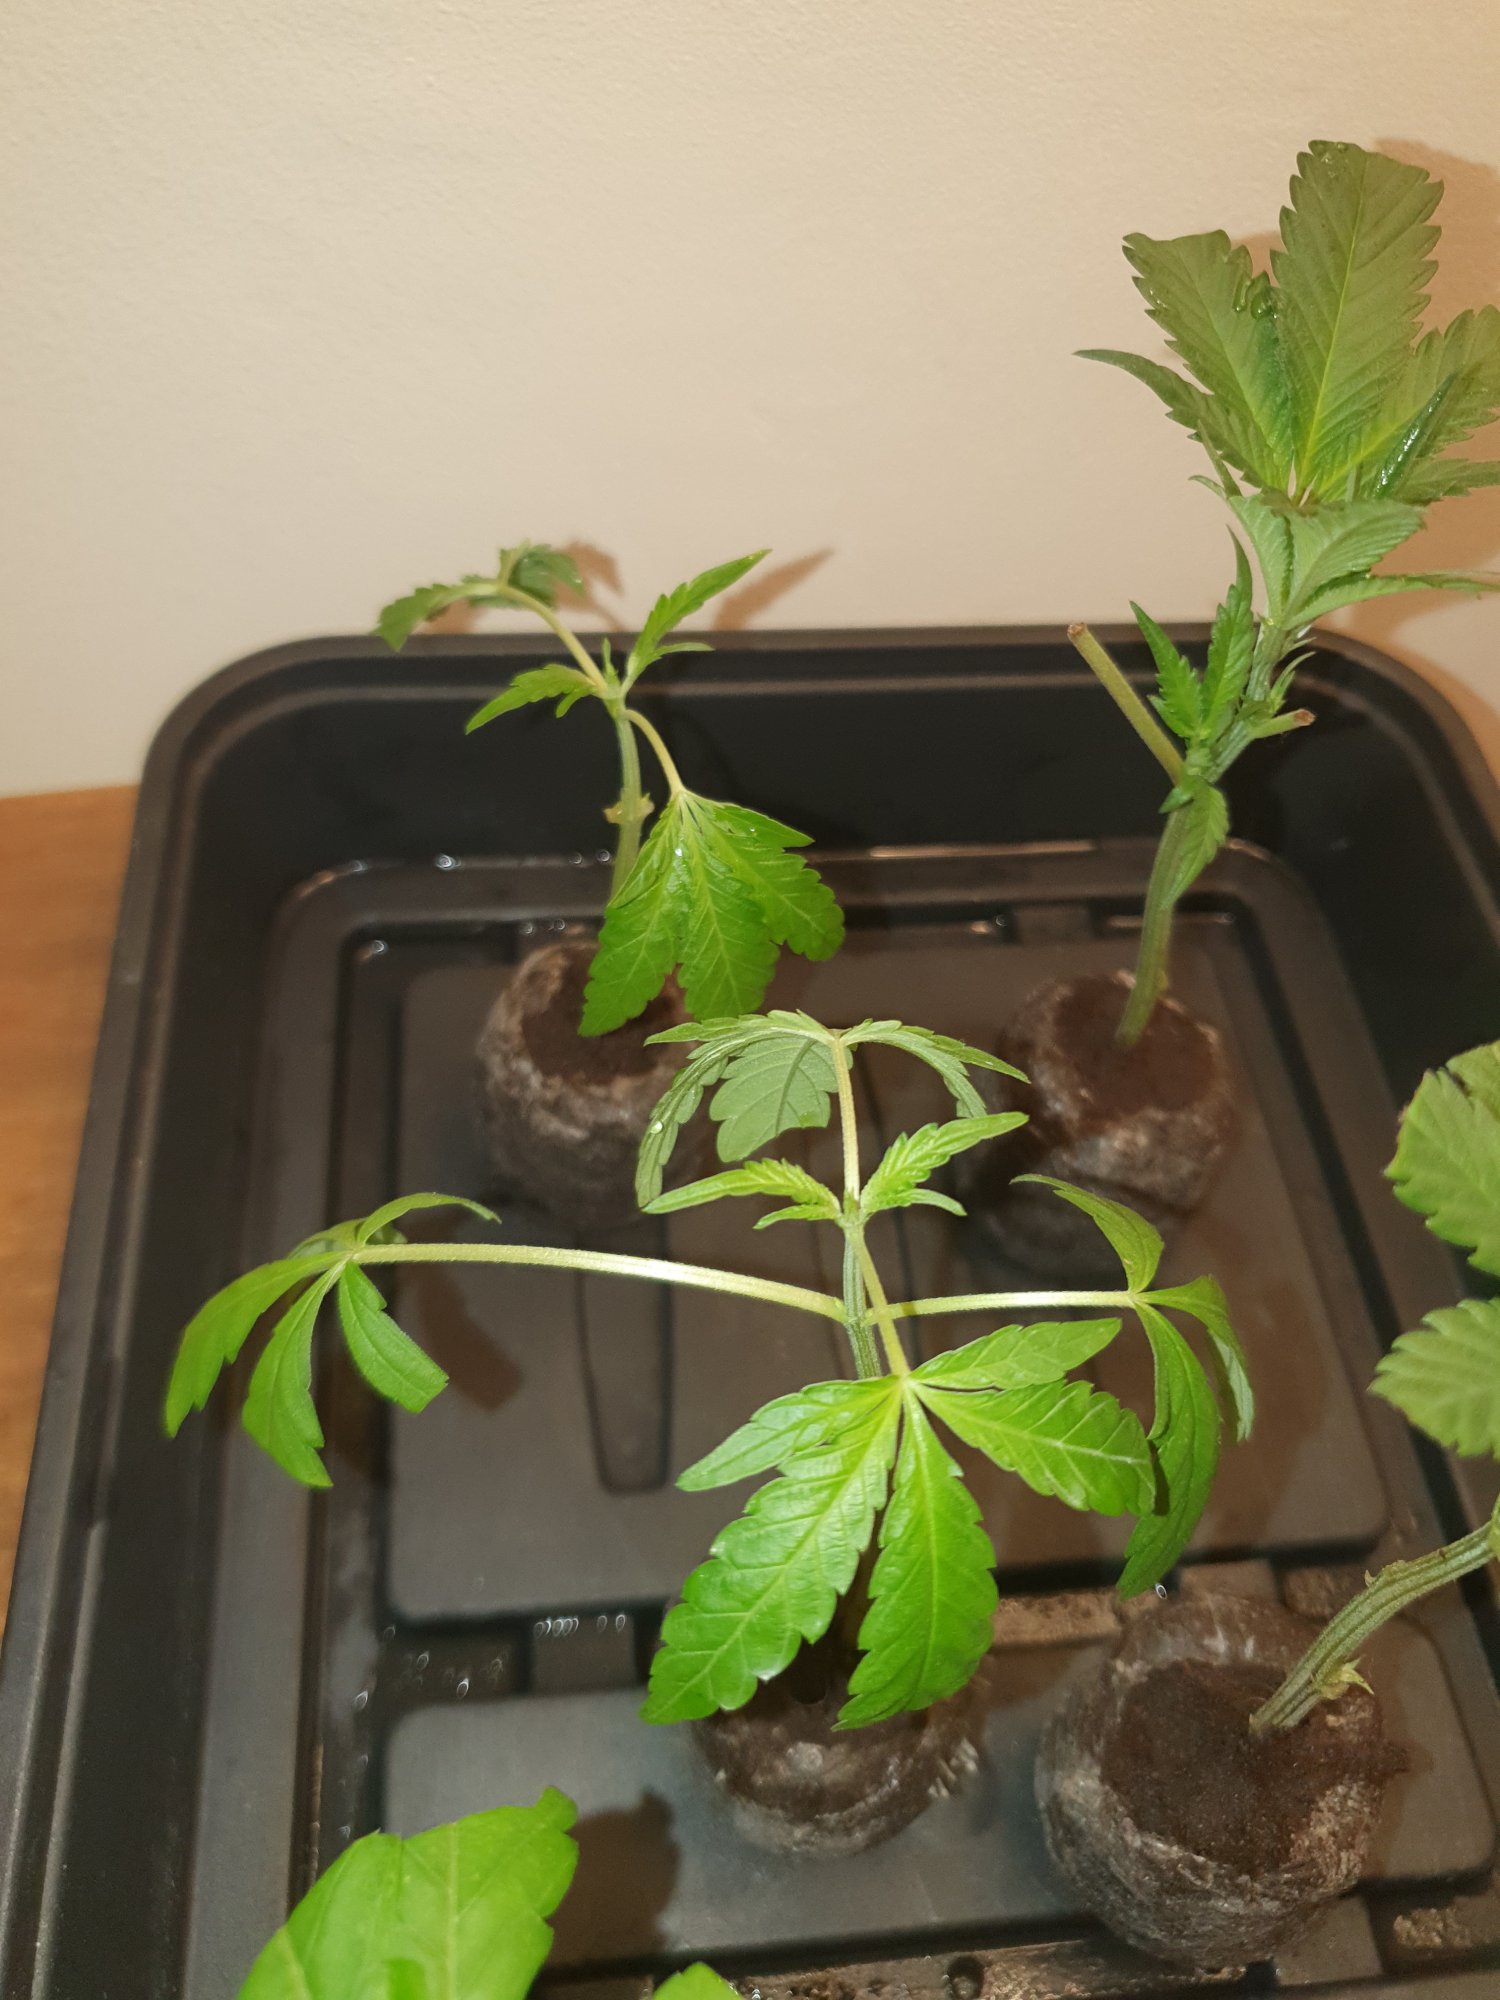 Droopy leaves on clones